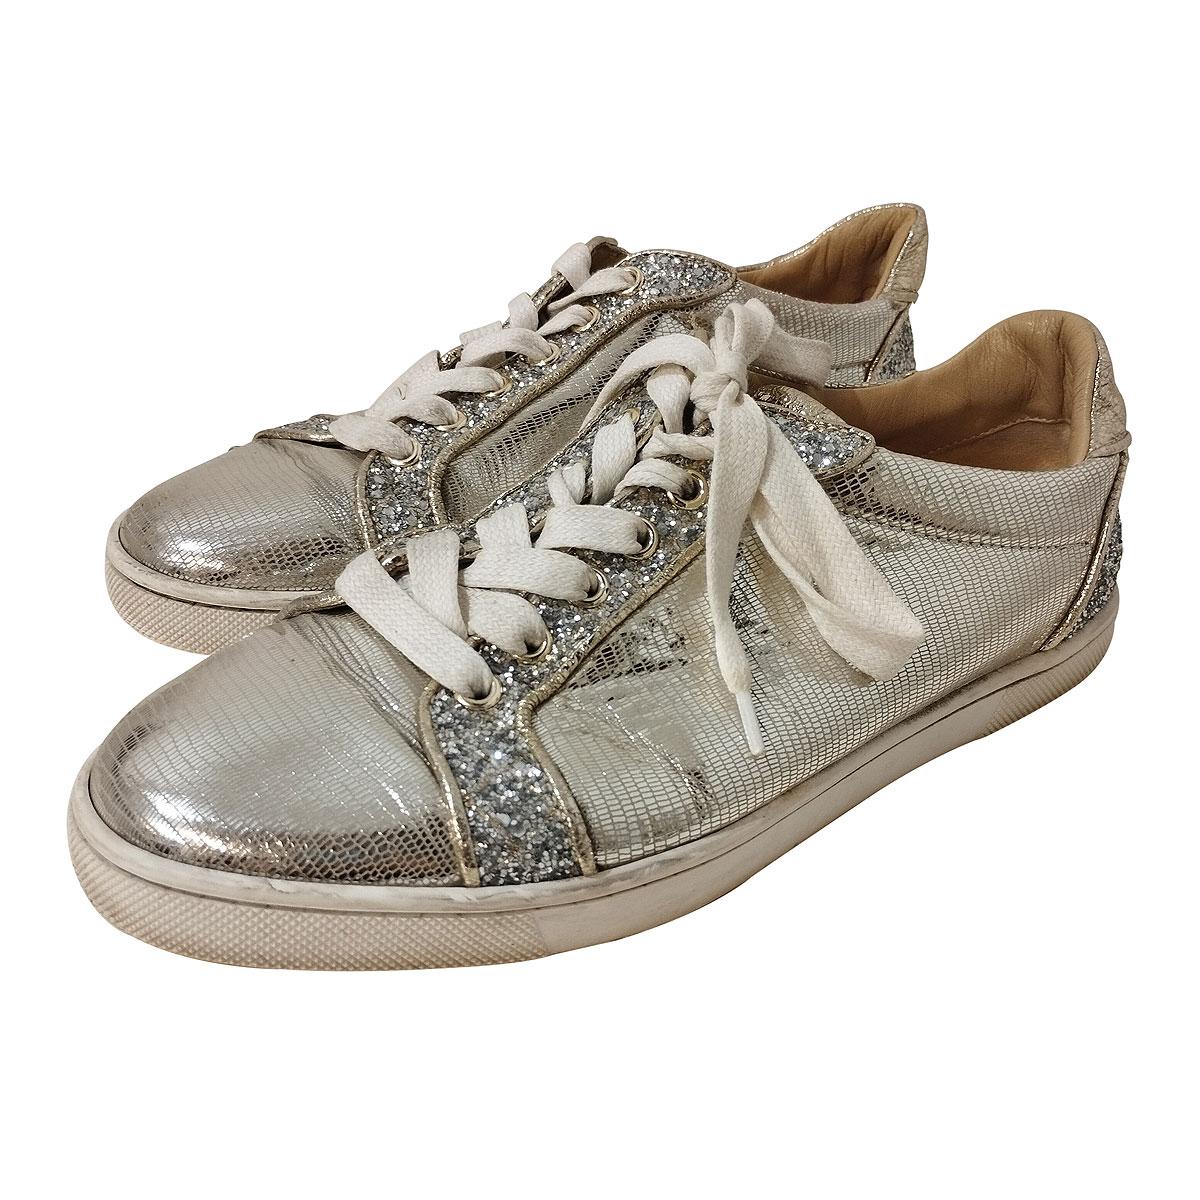 Beautiful and chic Louboutin's sneakers
Leather
Silver/platinum color
Laced
Glitter
White rubber sole
Worldwide fast shipping included in the price